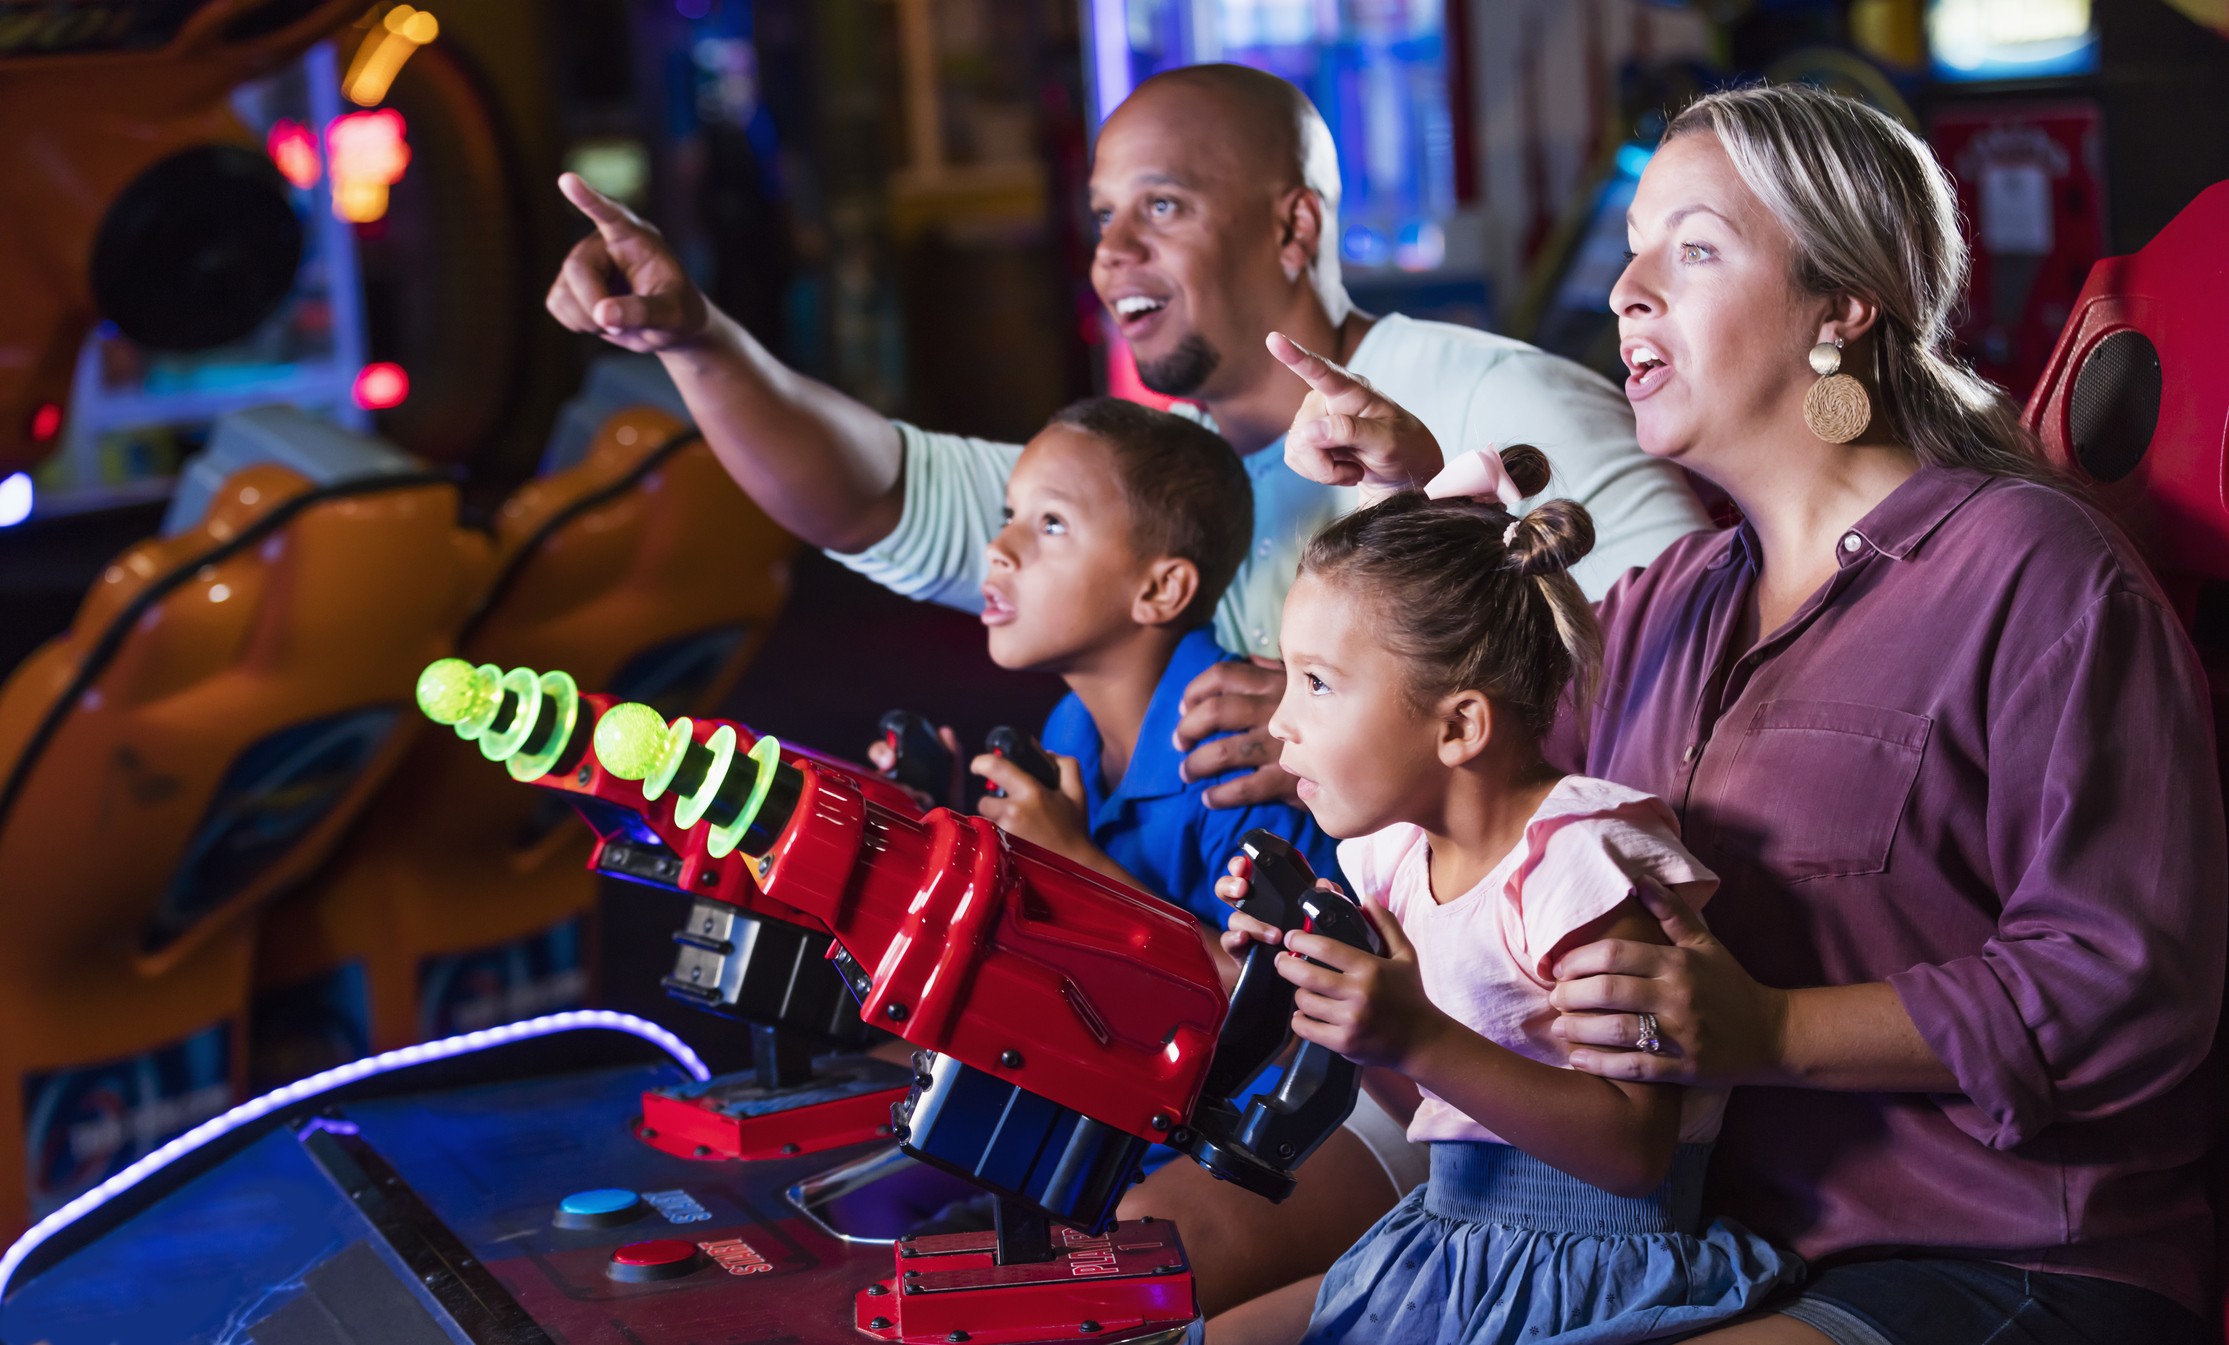 Family entertainment center franchise - Mixed race family playing game at video arcade